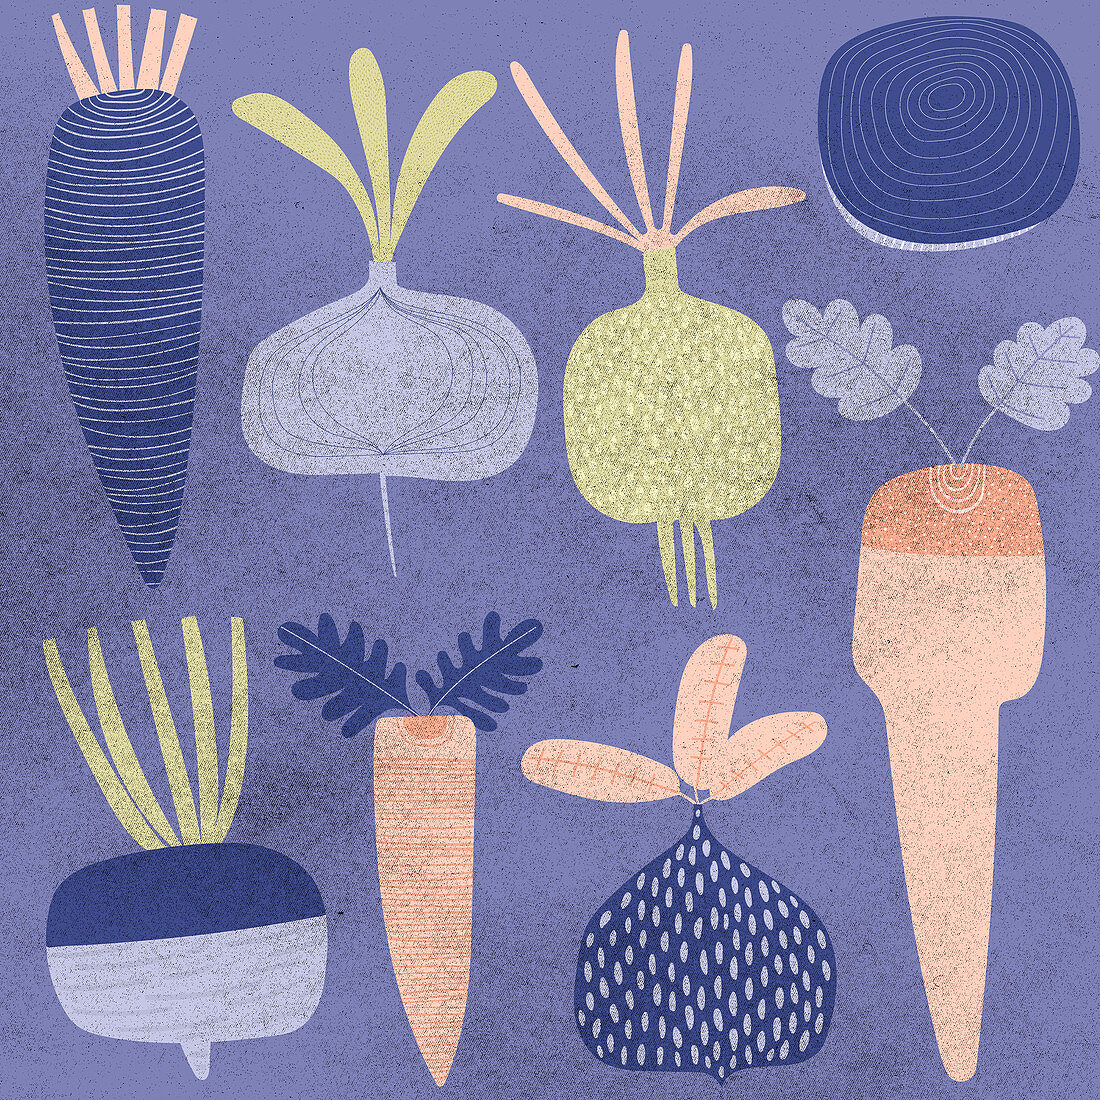 Collection of root vegetables, illustration